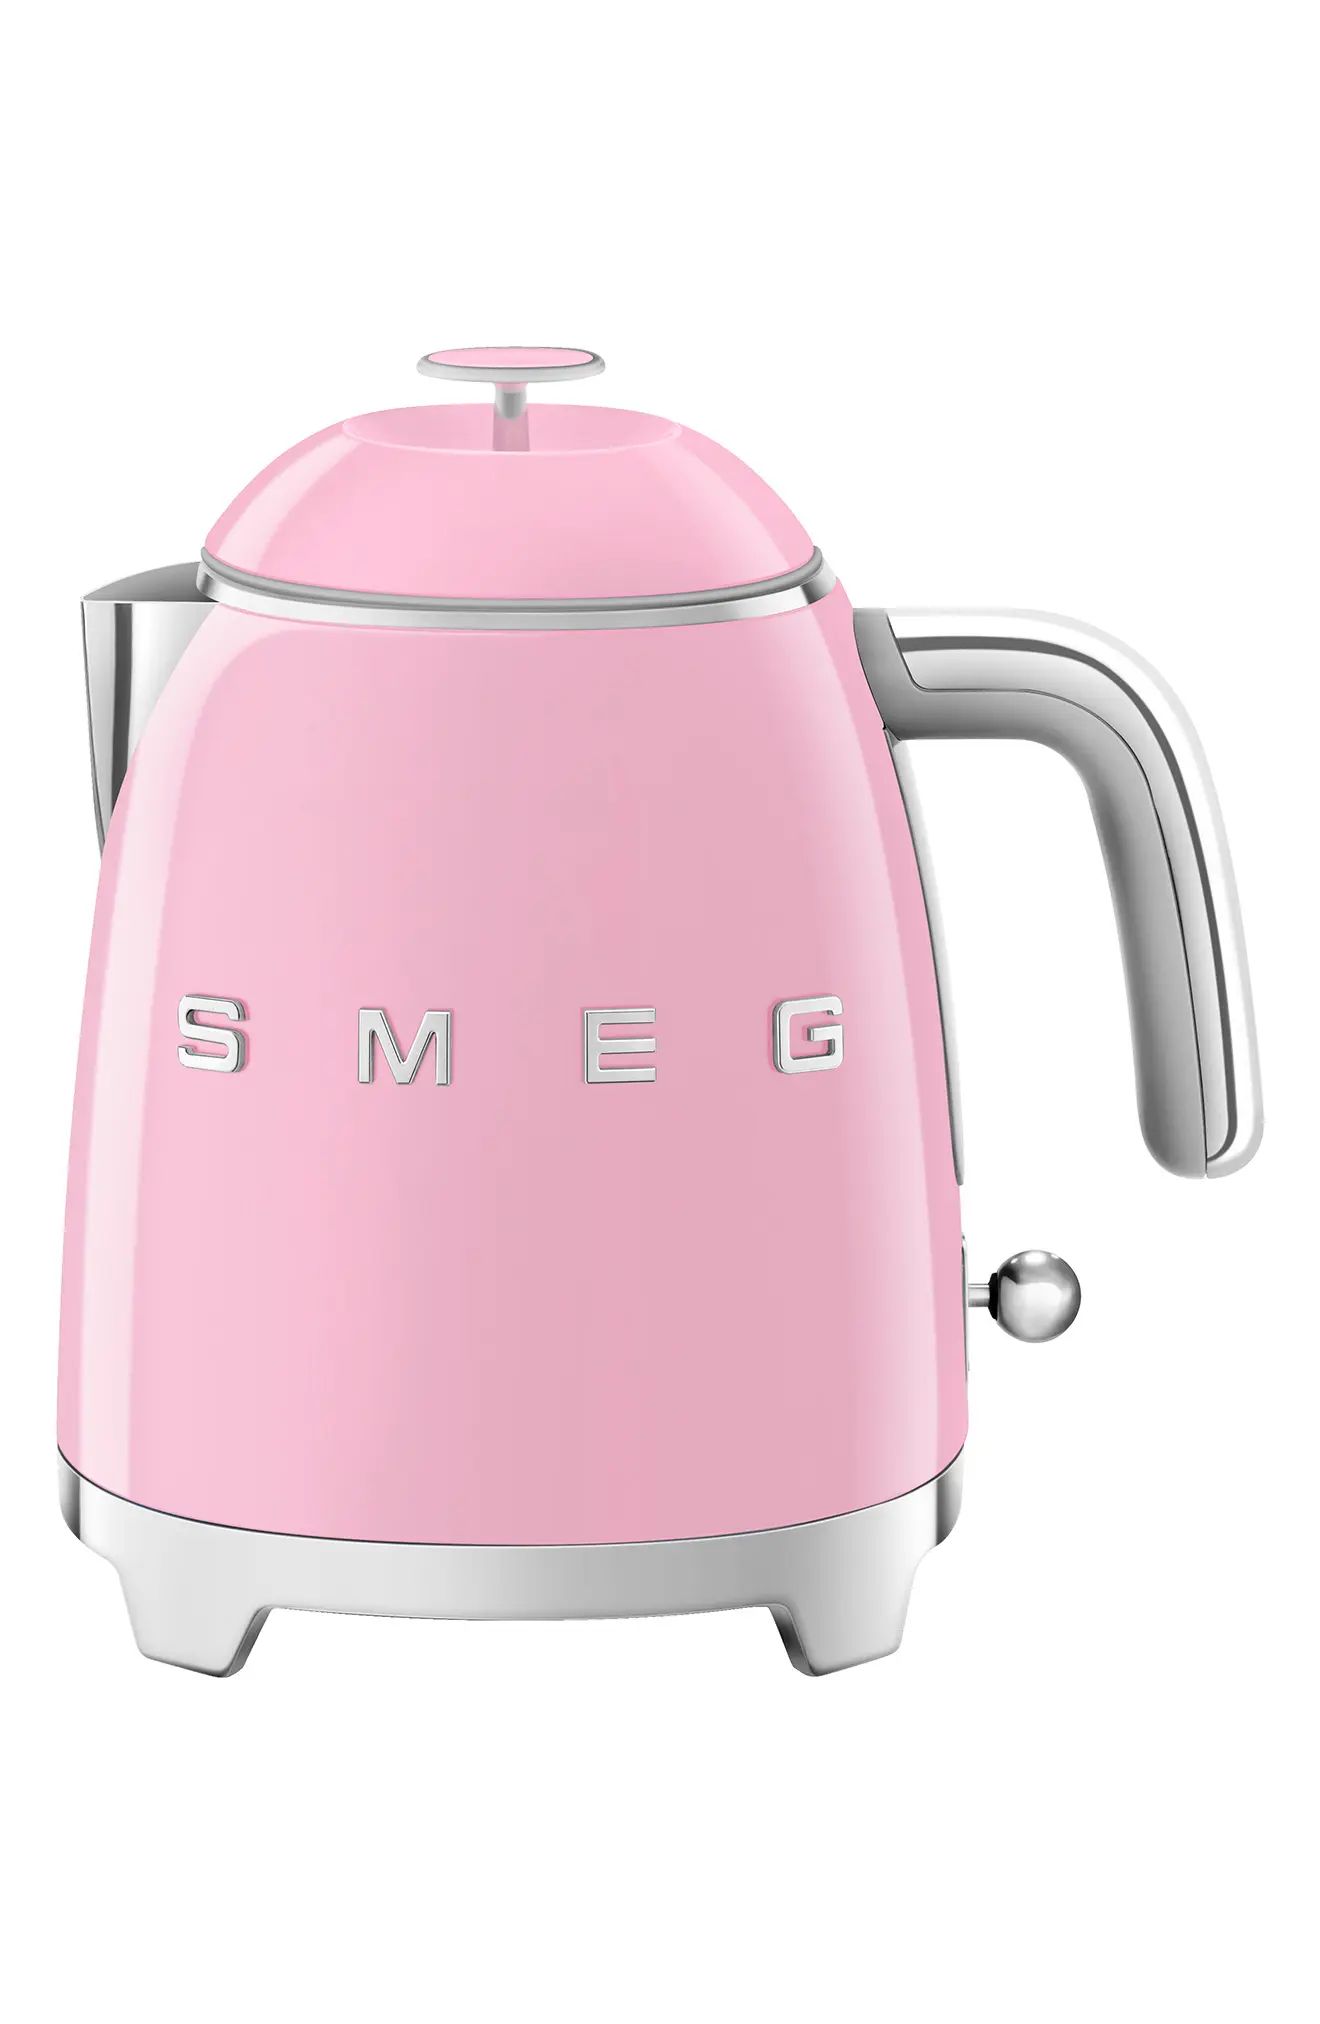 smeg 50's Retro Style Mini Electric Kettle in Pink at Nordstrom | Nordstrom